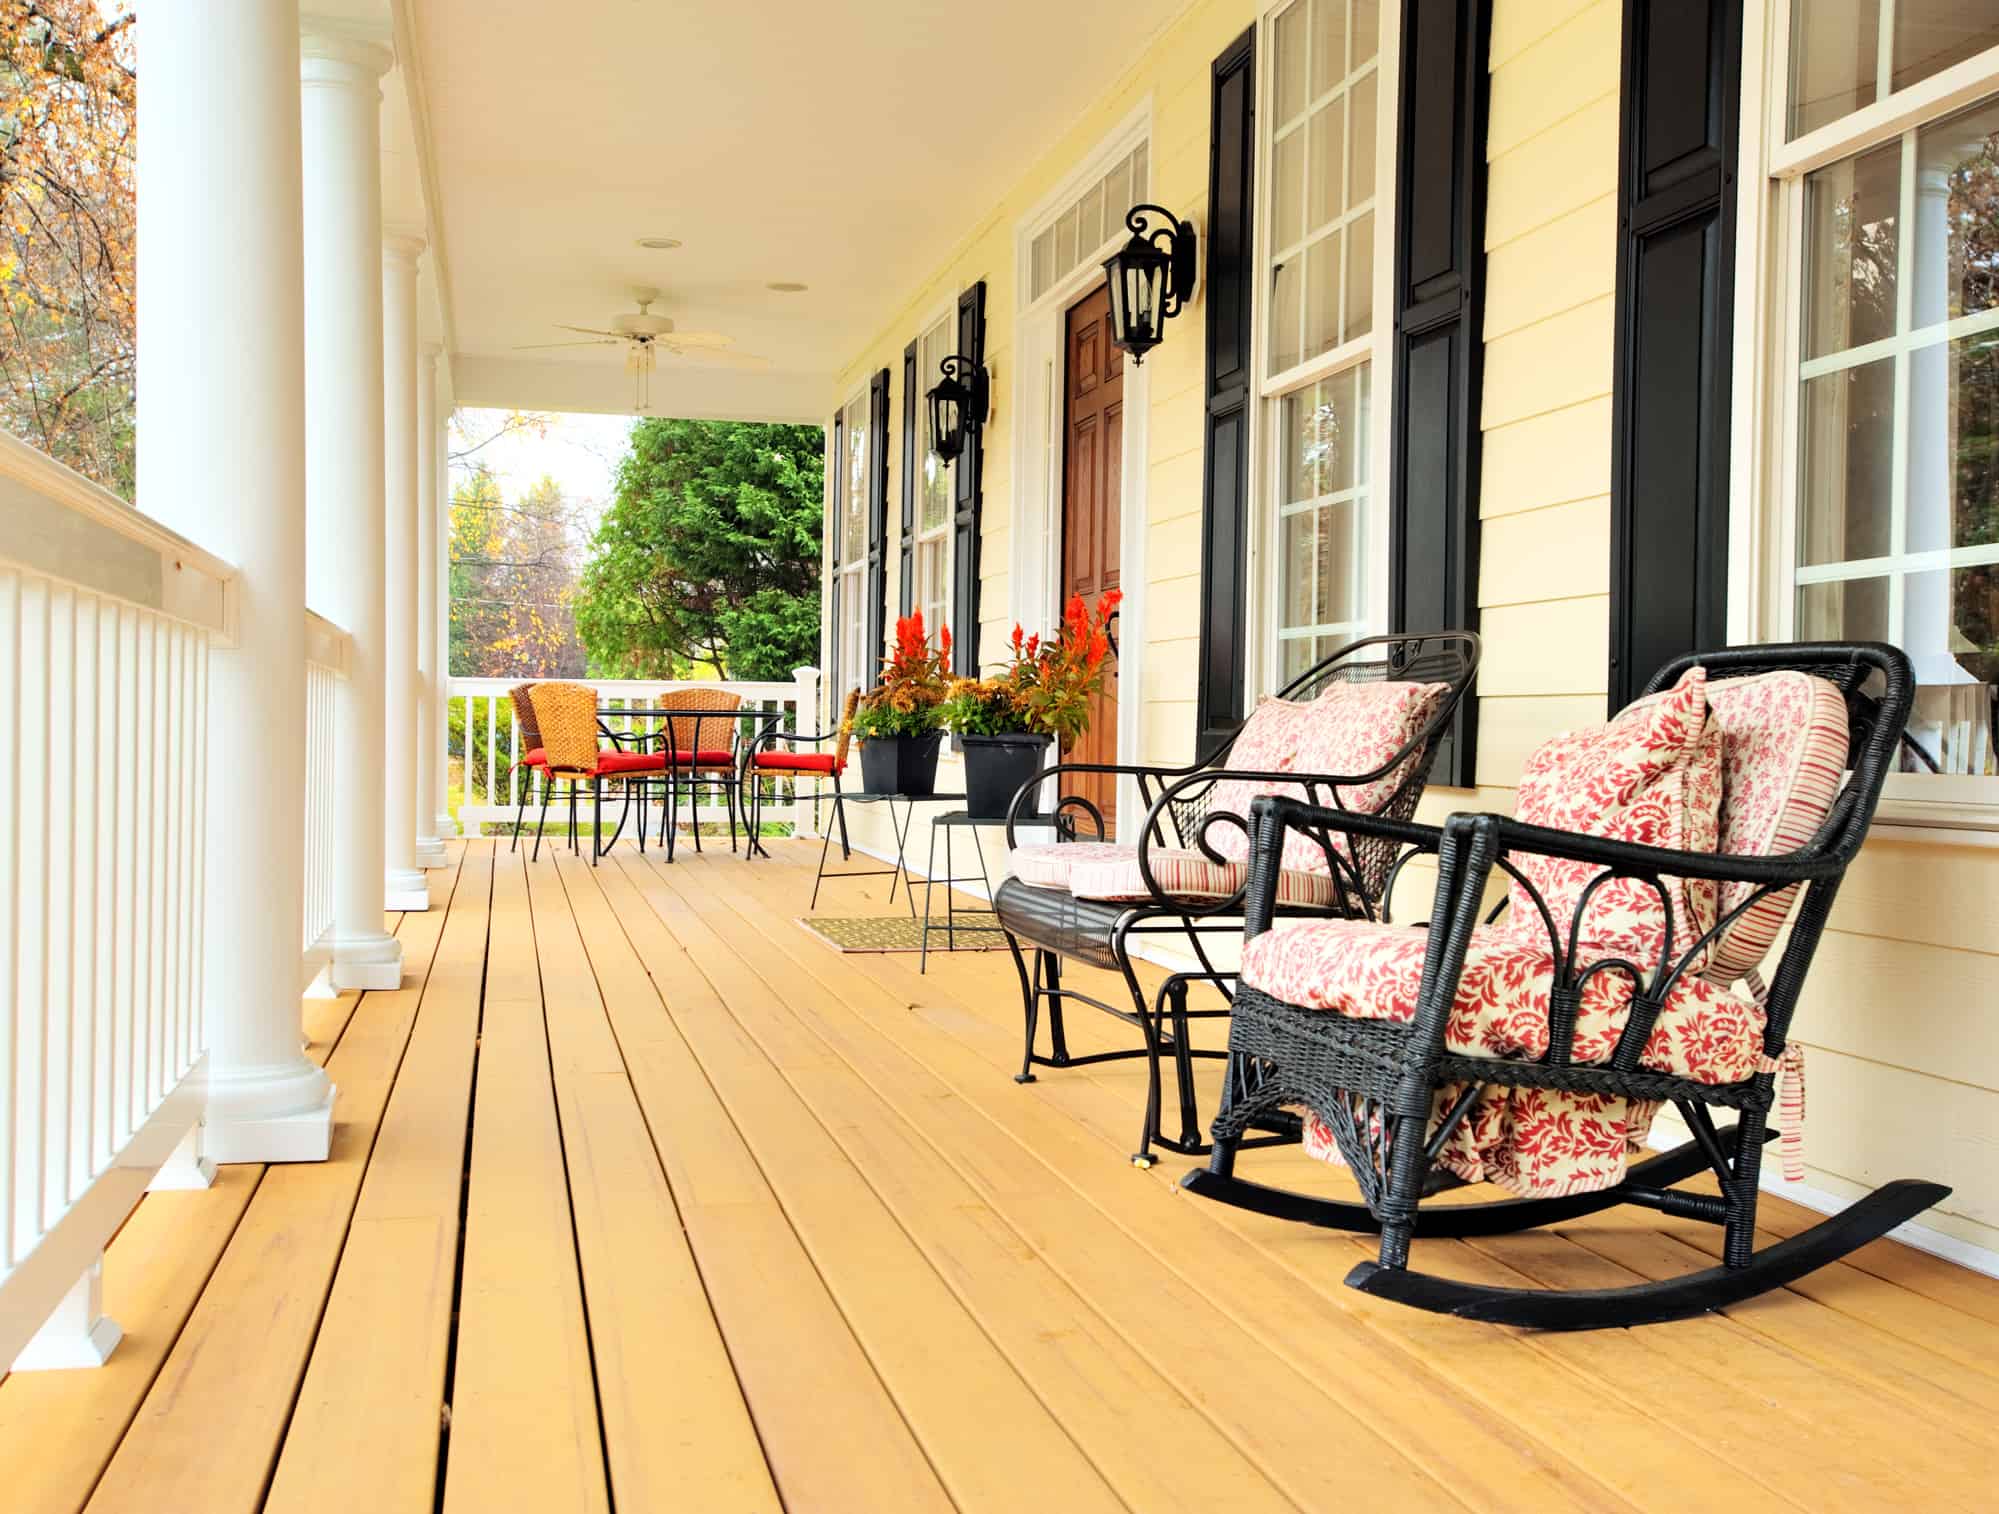 The Best Paint for Wicker Patio Furniture